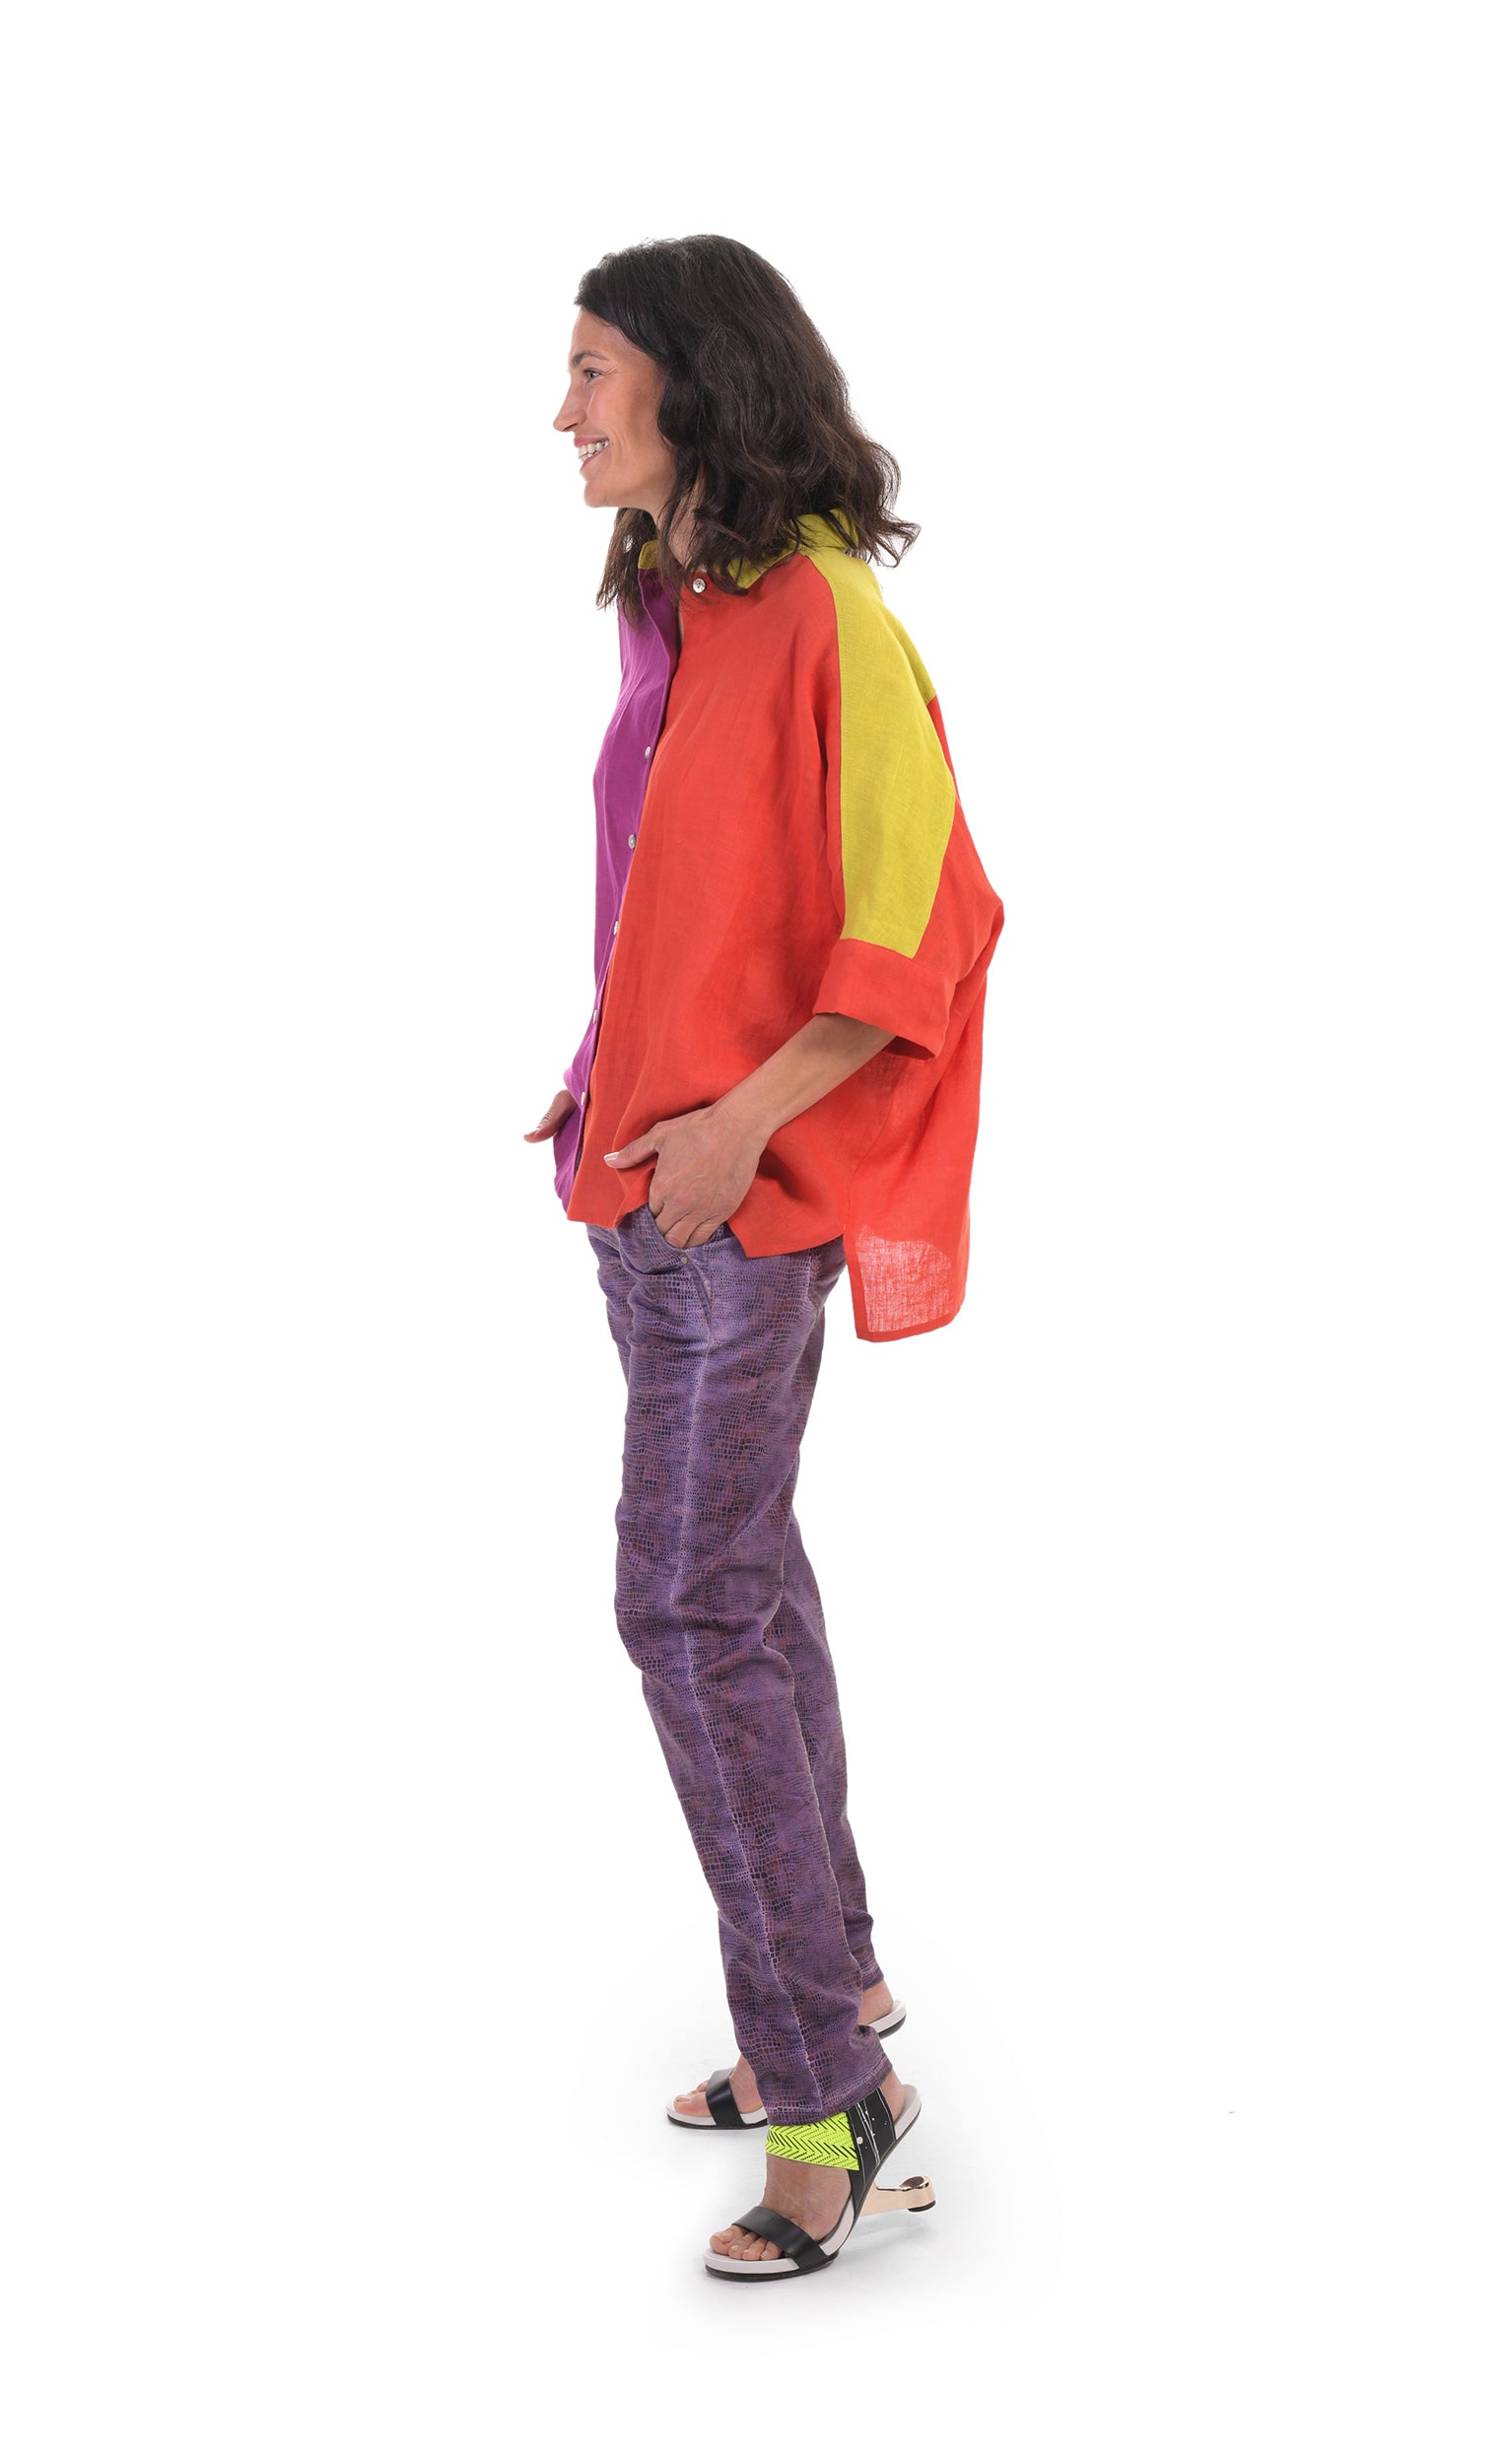 Left side full body view of a woman wearing the alembika colorblock linen shirt. This shirt is red on the left side, purple on the right side and yellow on the sleeves and shoulders. The shirt has a button up front, a shirt collar, and elbow length sleeves. On the bottom, the model is wearing purple pants.